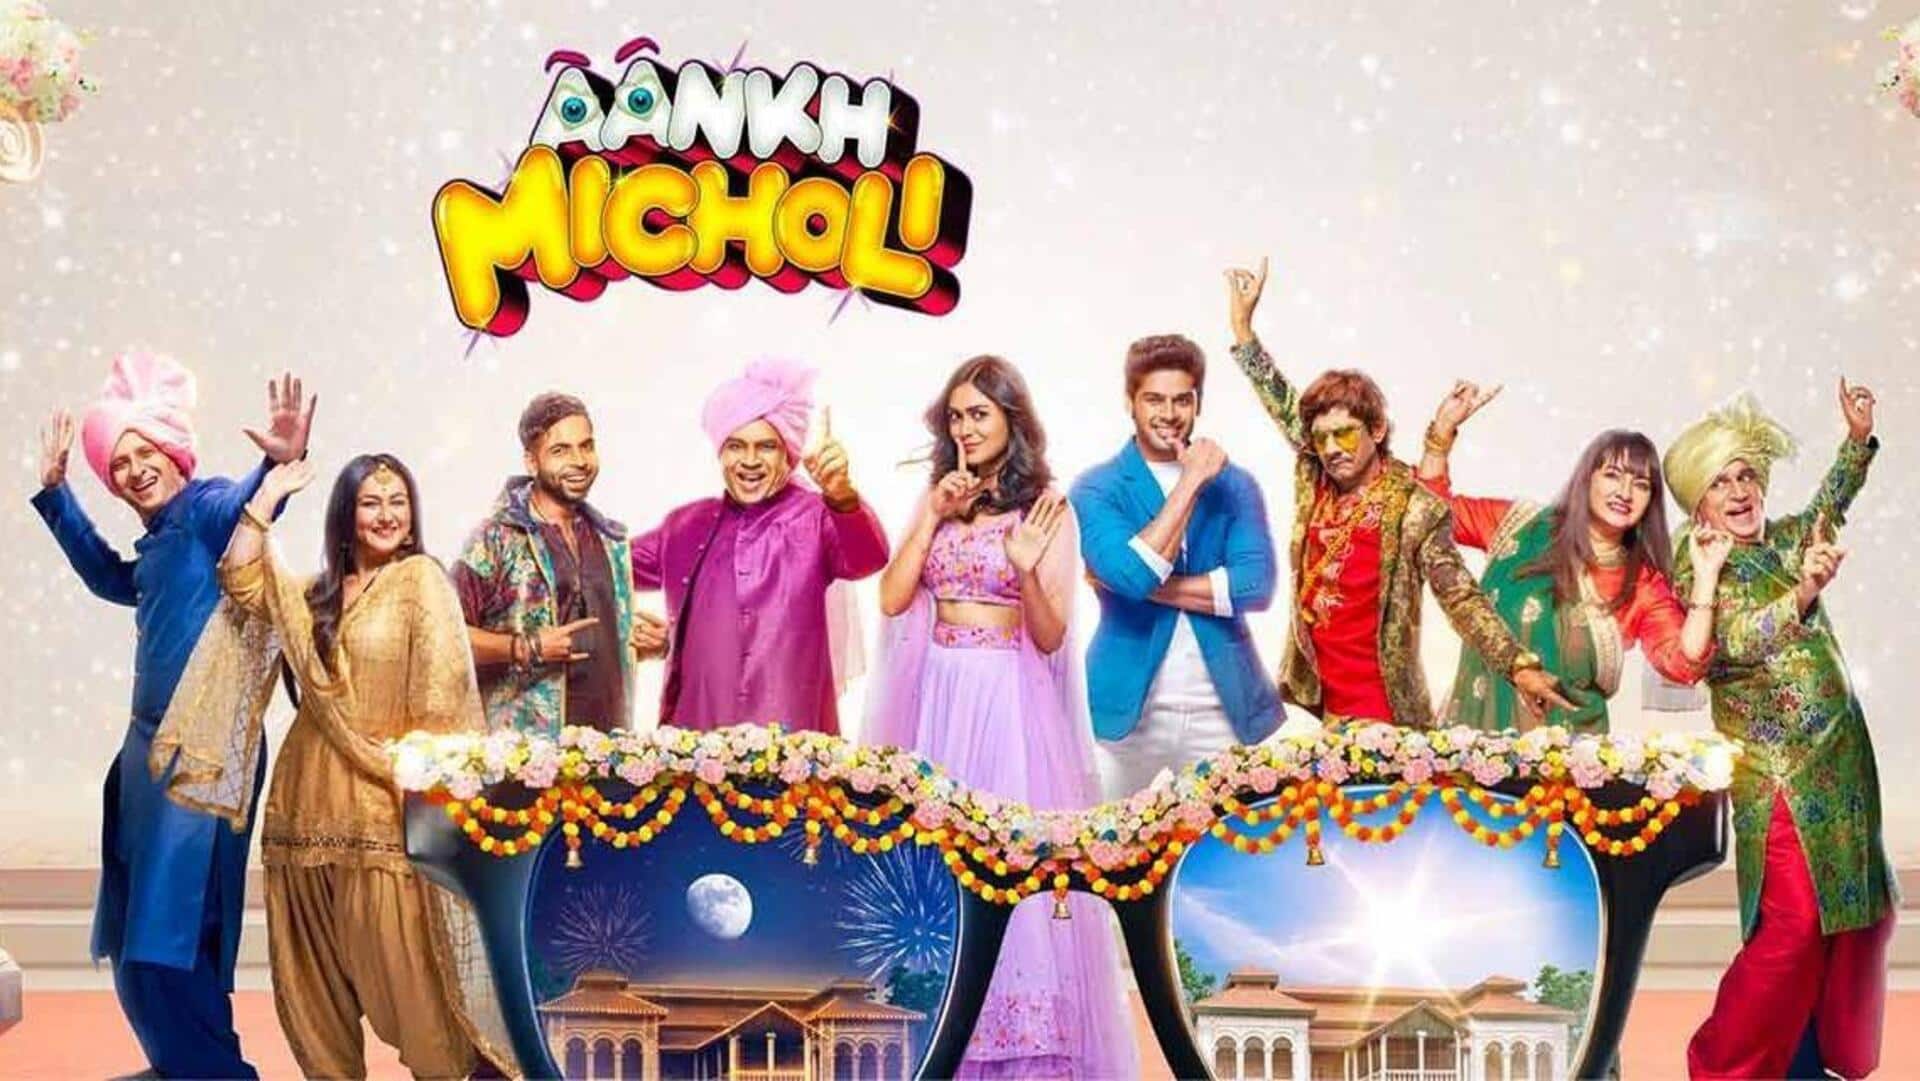 Box office collection: 'Aankh Micholi' set to be a disaster